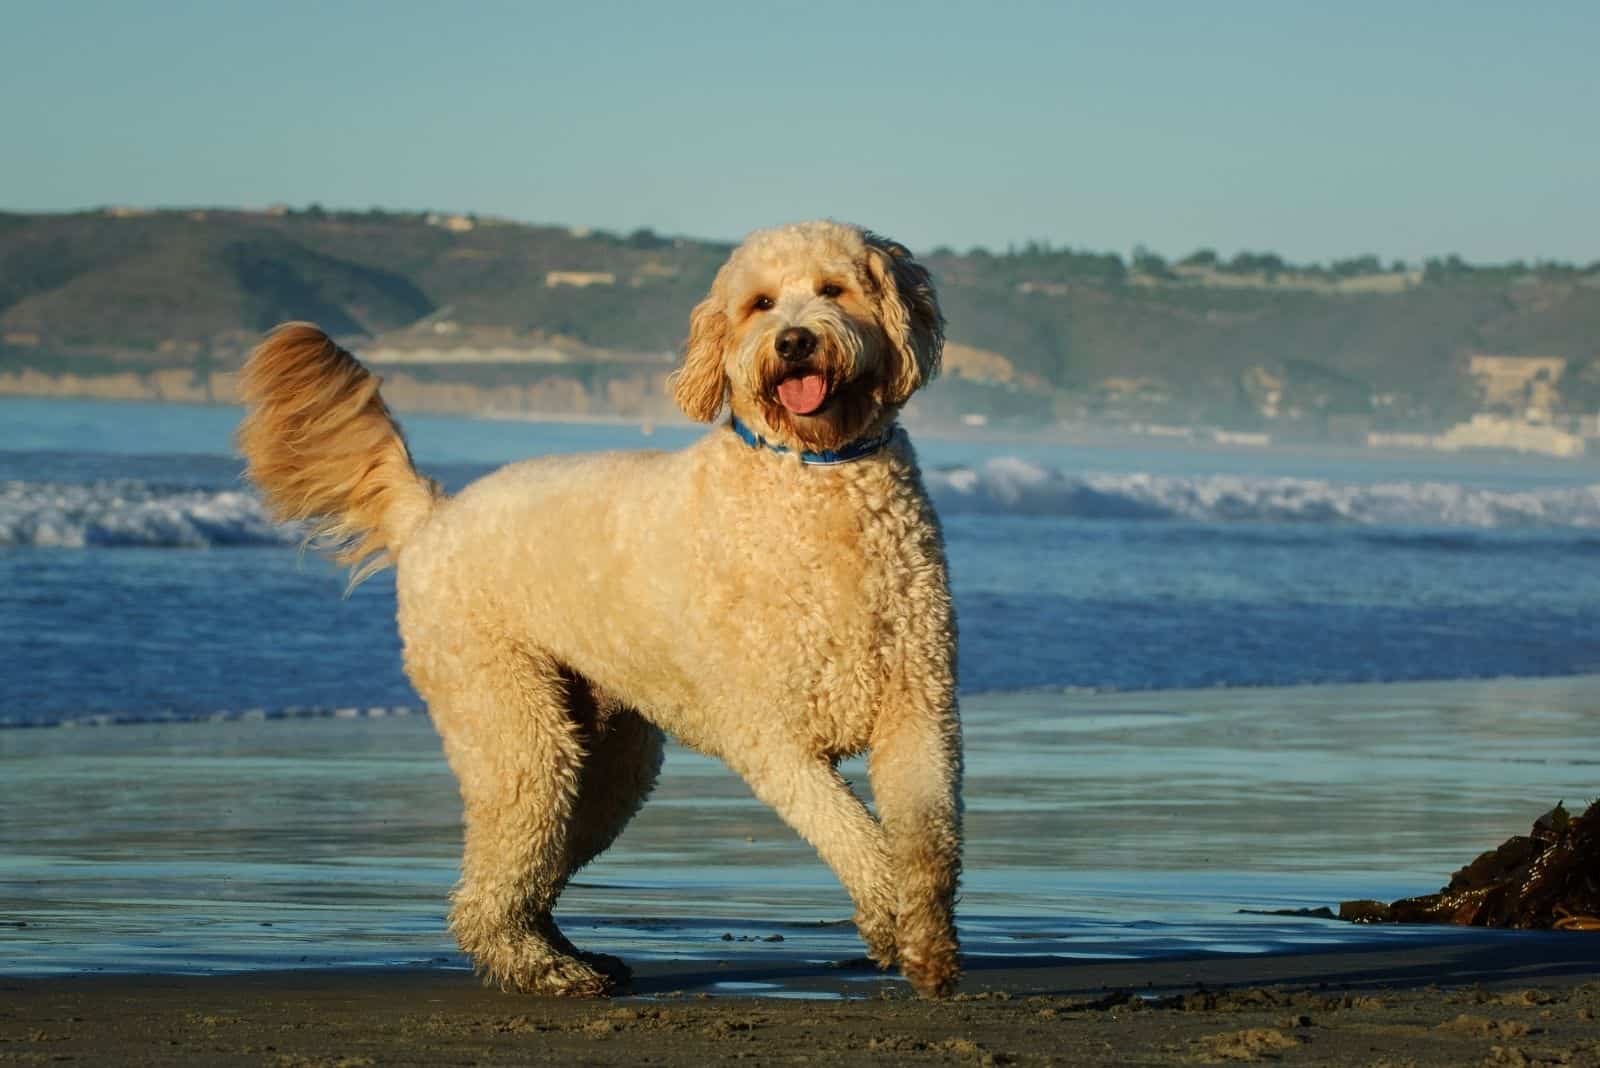 goldendoodle dog outdoor with the ocean as the background